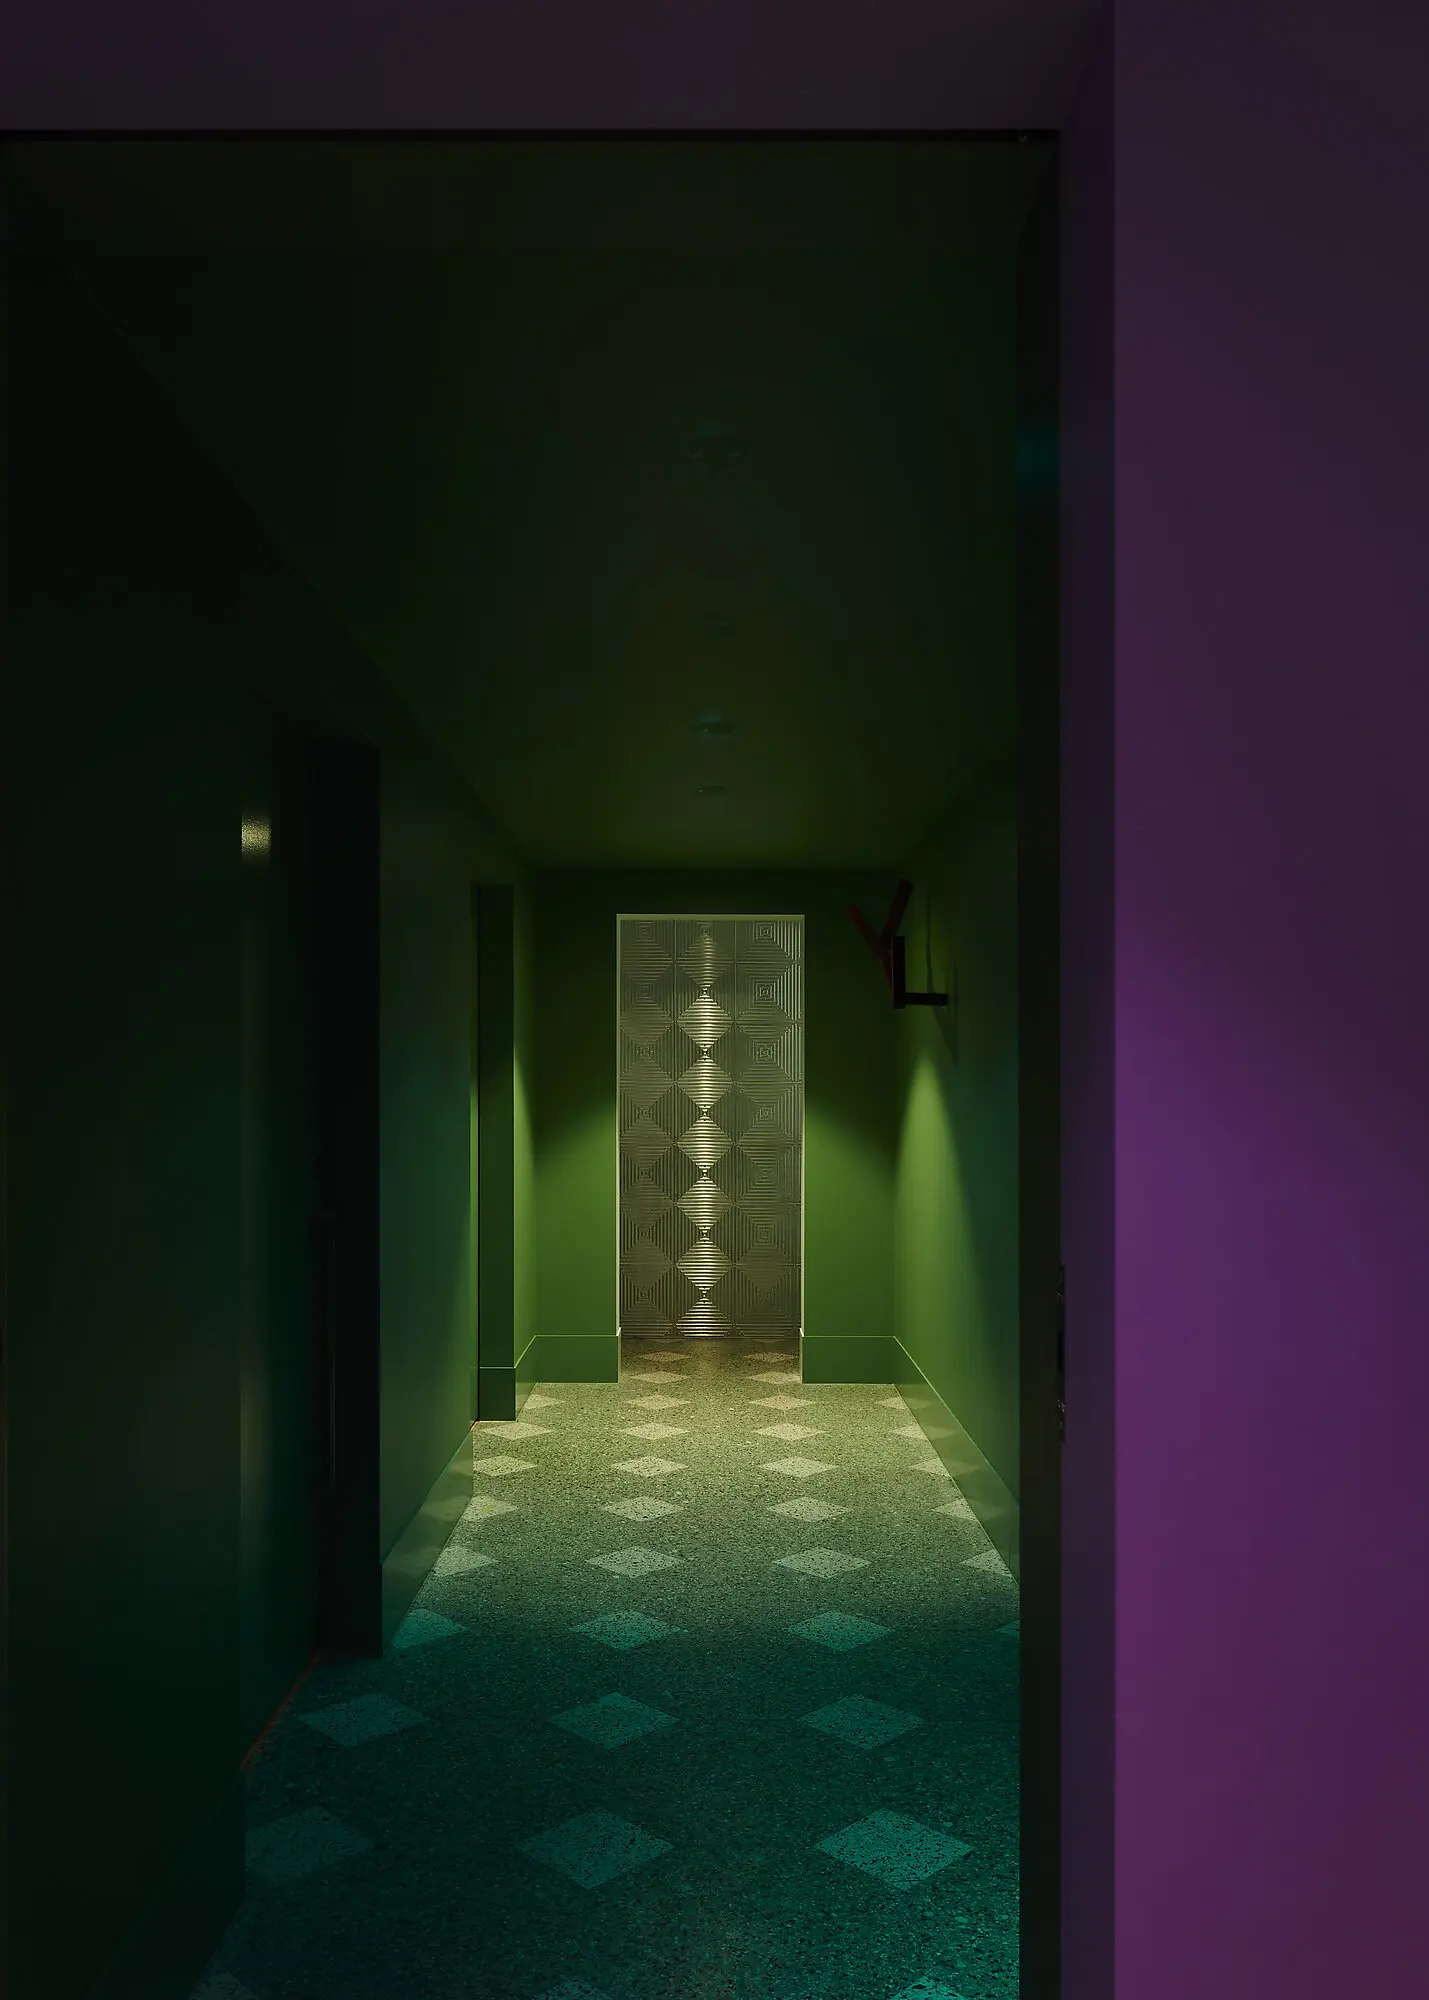 Corridor with purple entry and green carpet and walls.